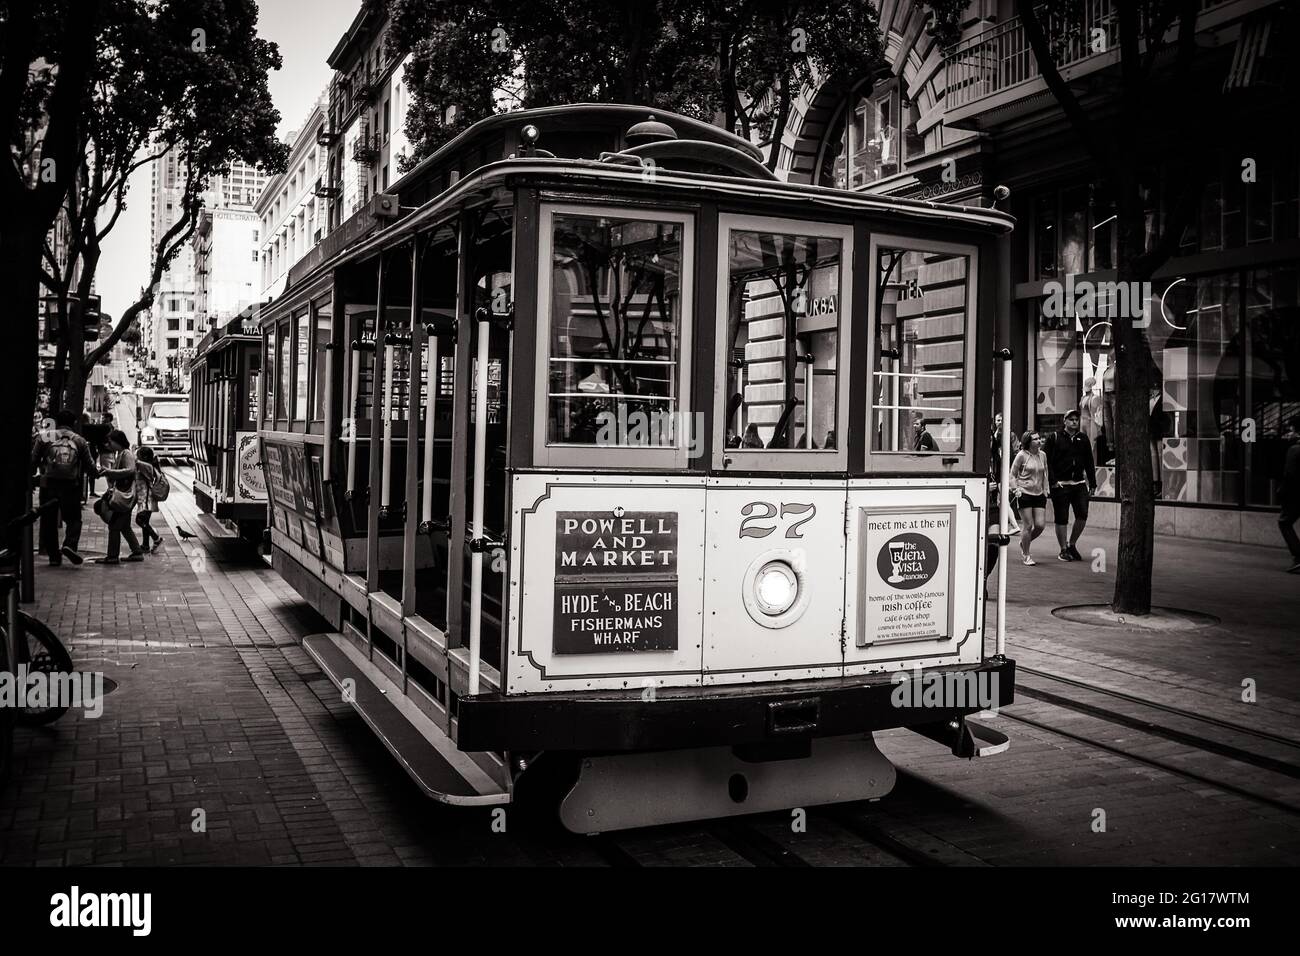 Close up of the Powell and Market cable car in black and white Stock Photo